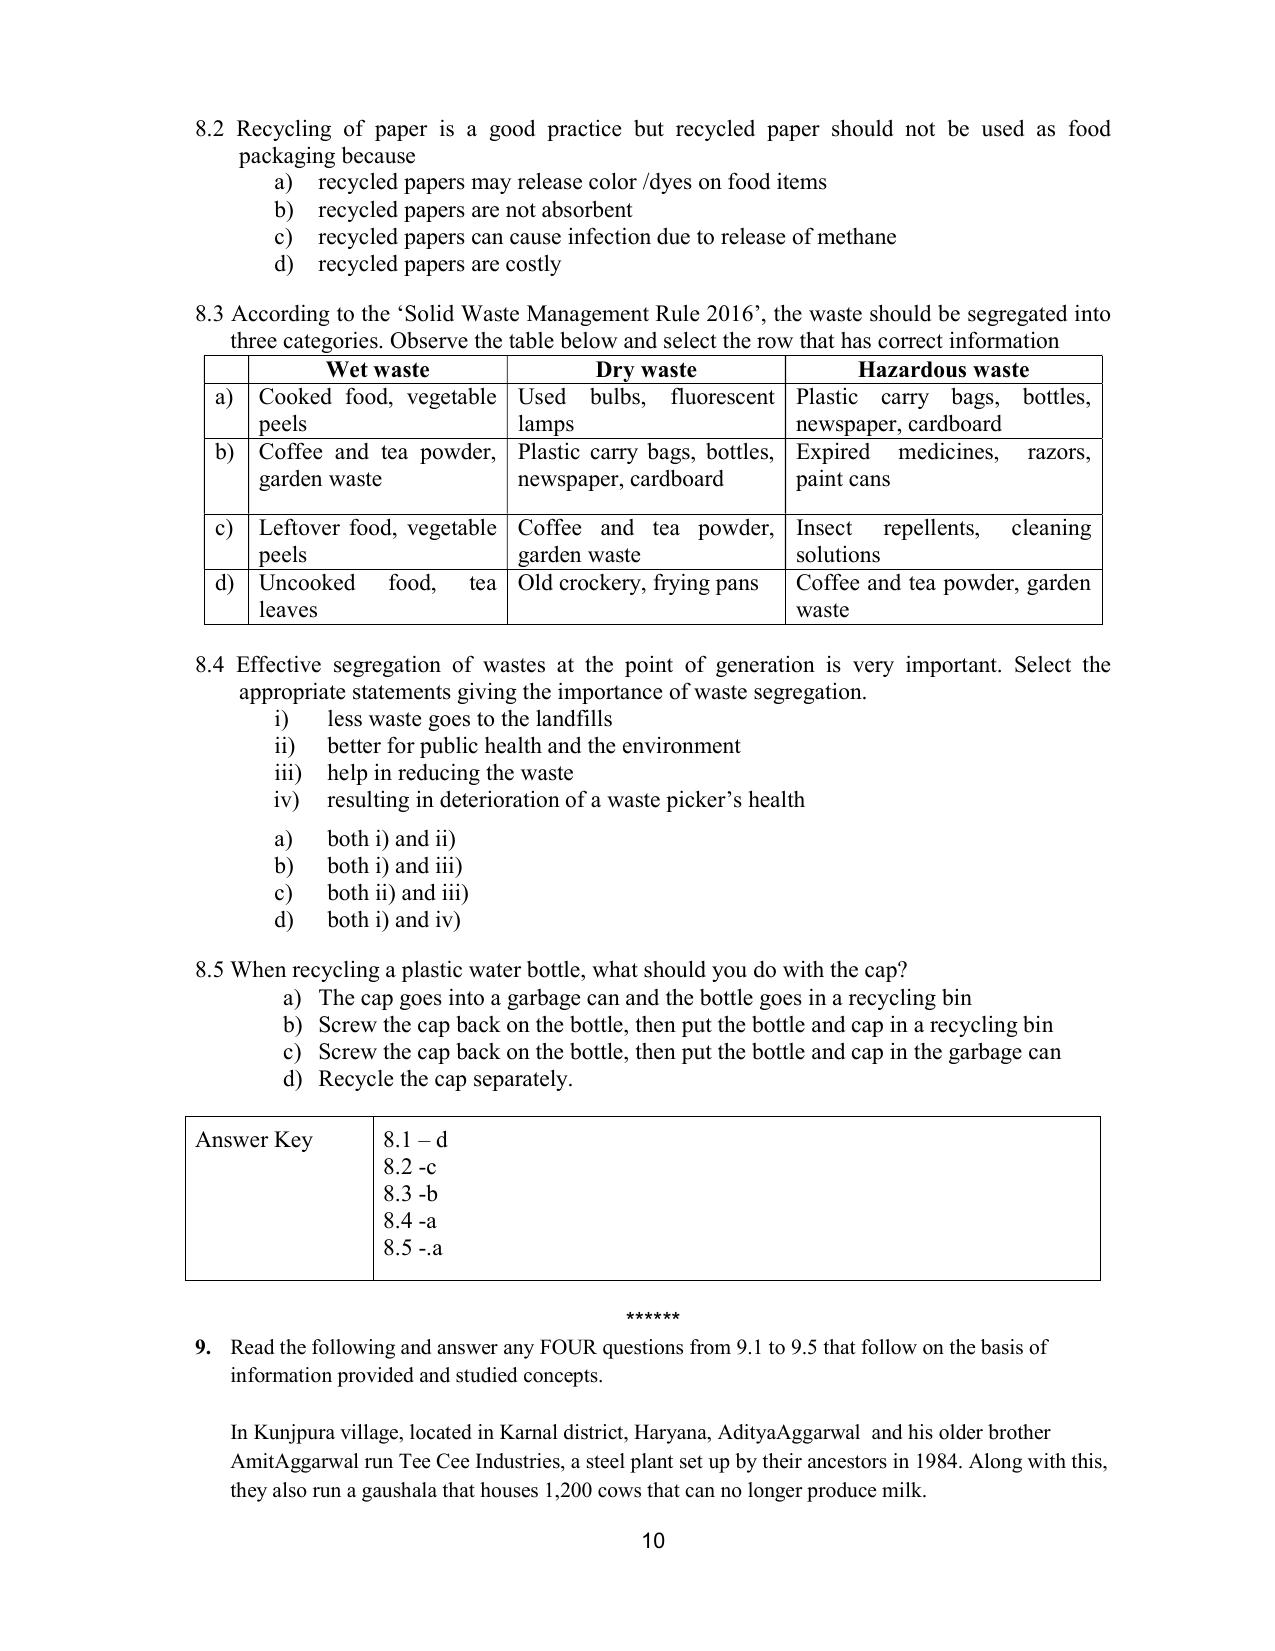 CBSE Class 10 Science Question Bank - Page 10